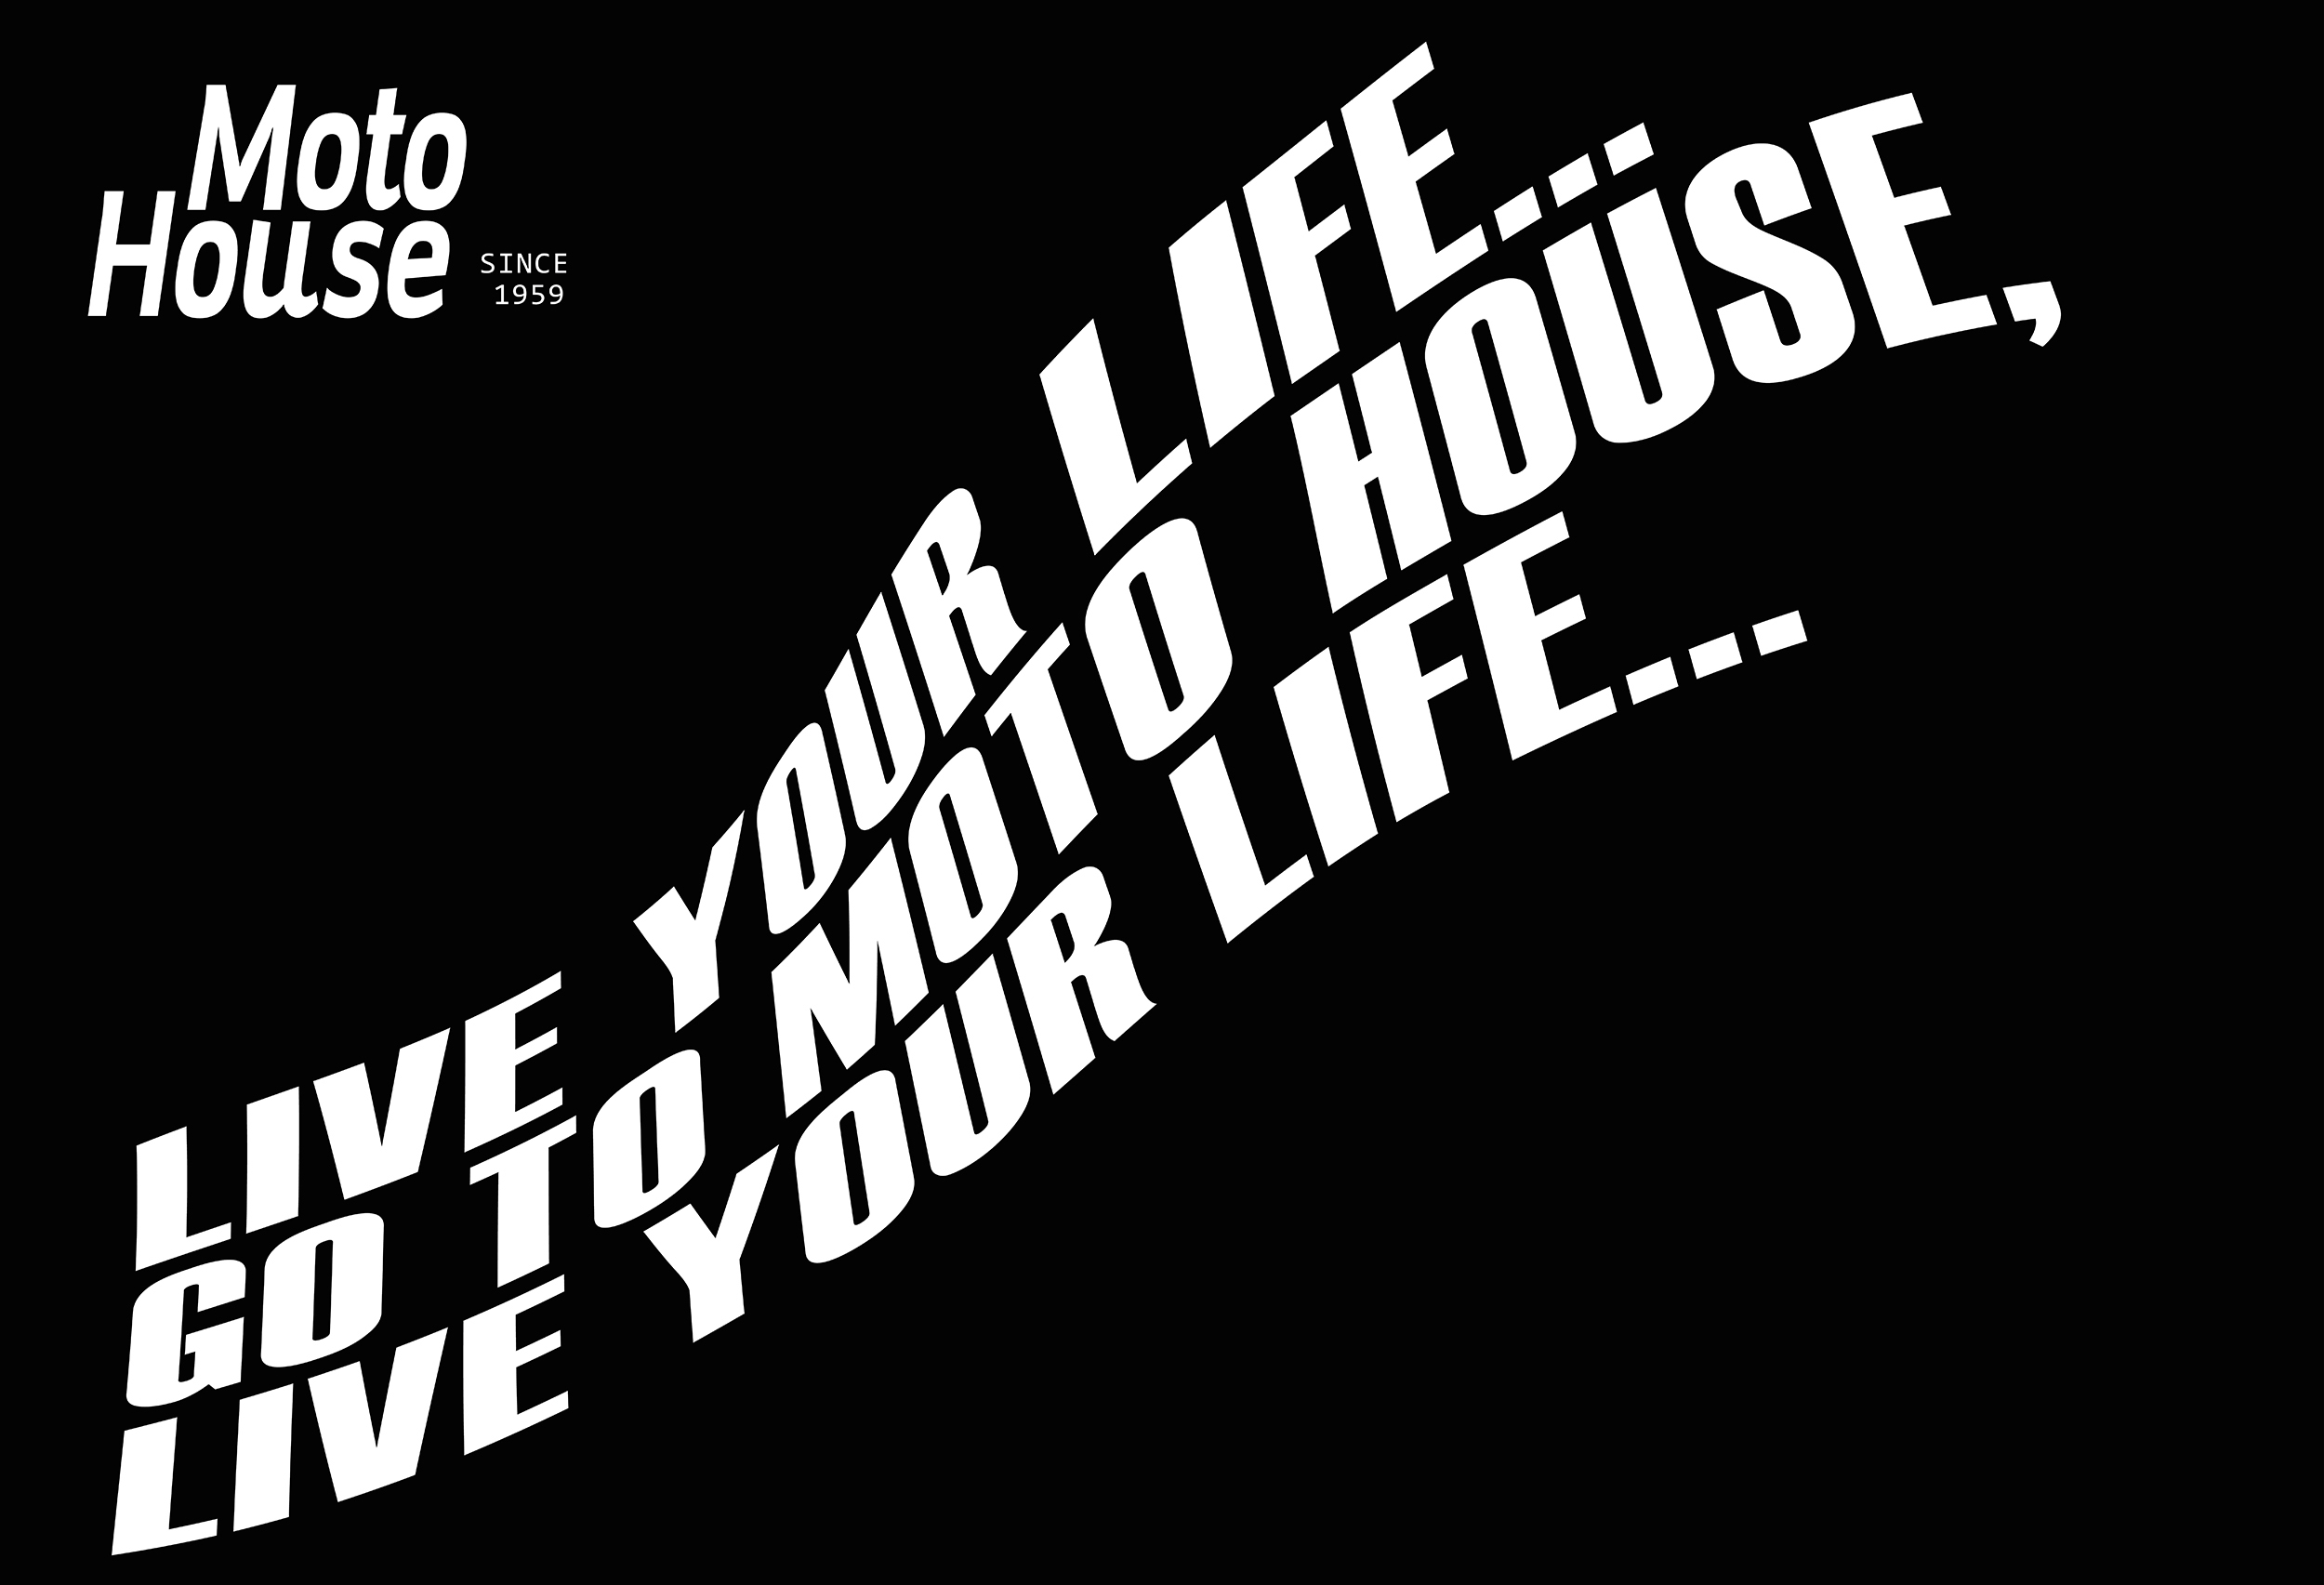 Go to Moto house, Live your life